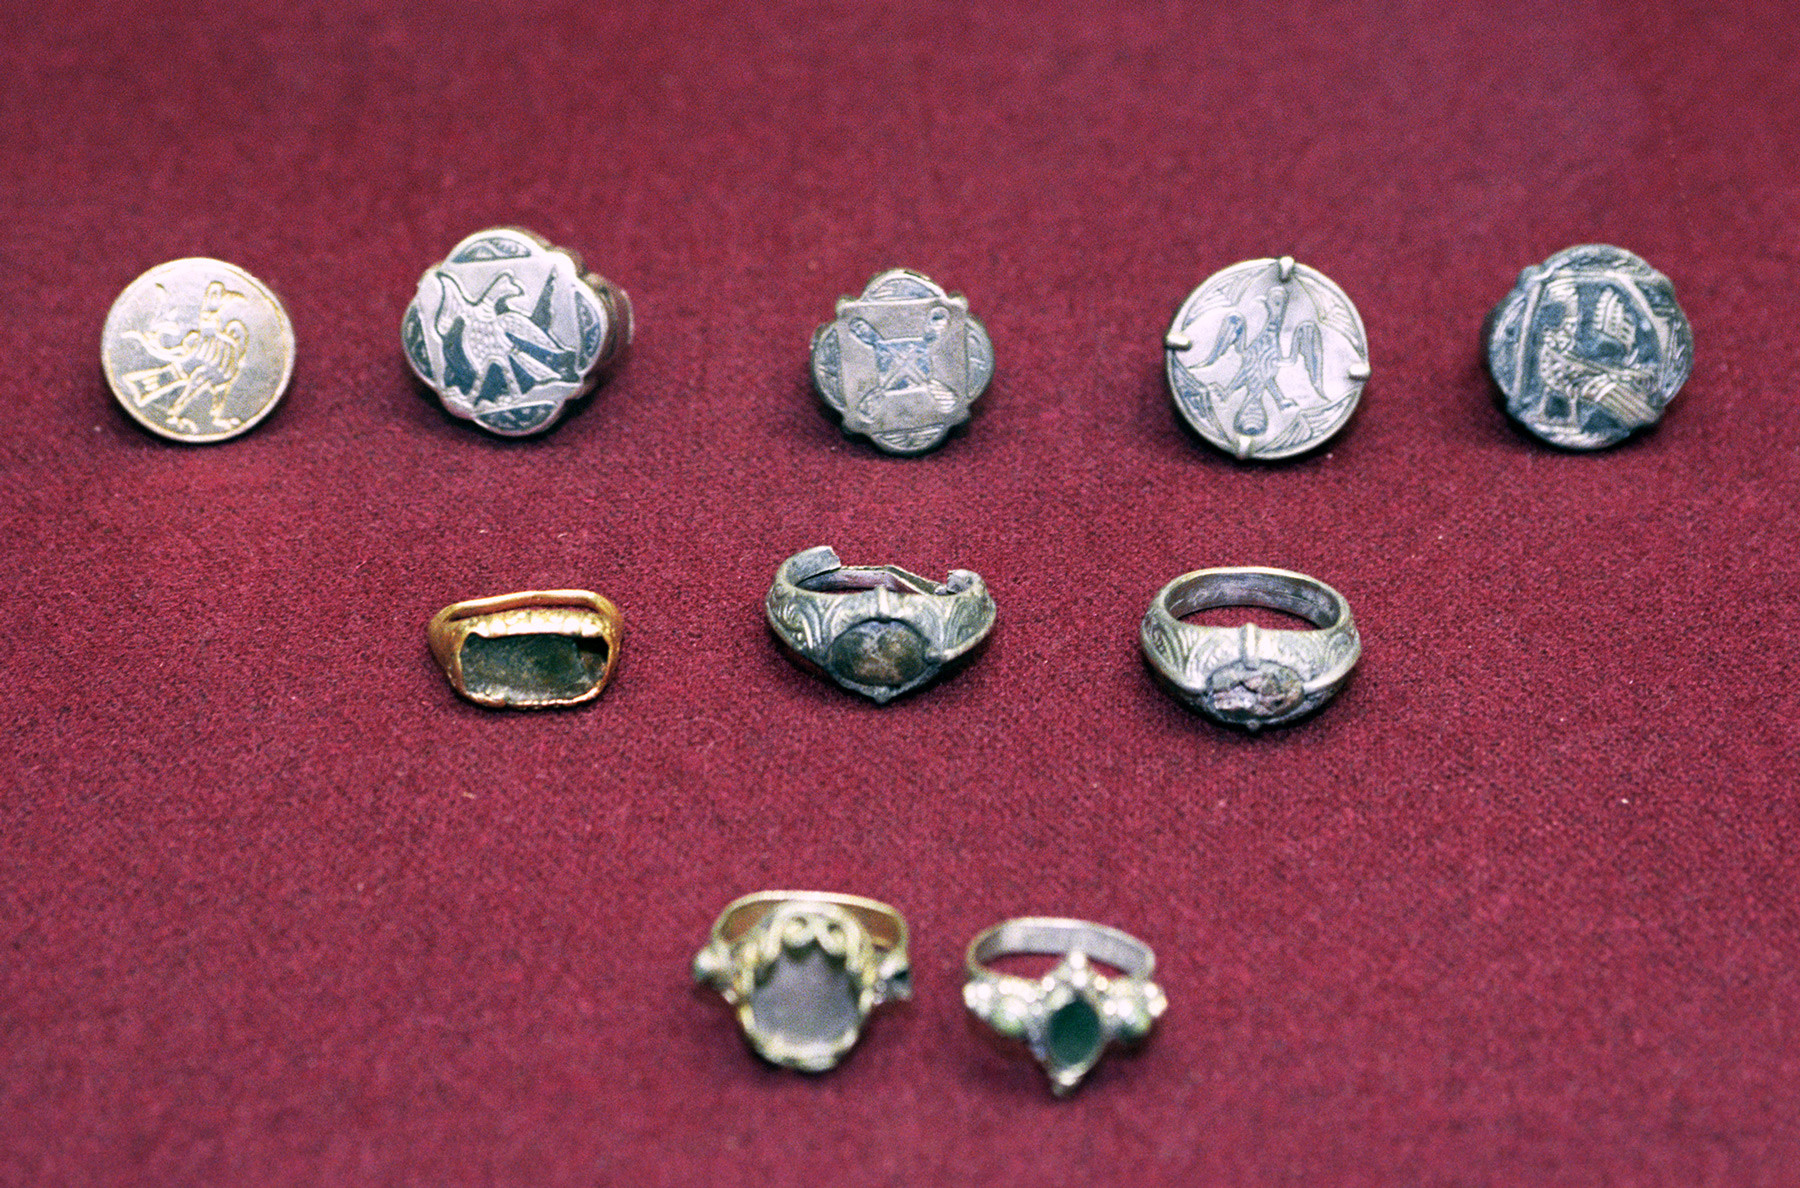 The find contained rare jewelry produced not only in Russia but also in Scandinavia and Persia